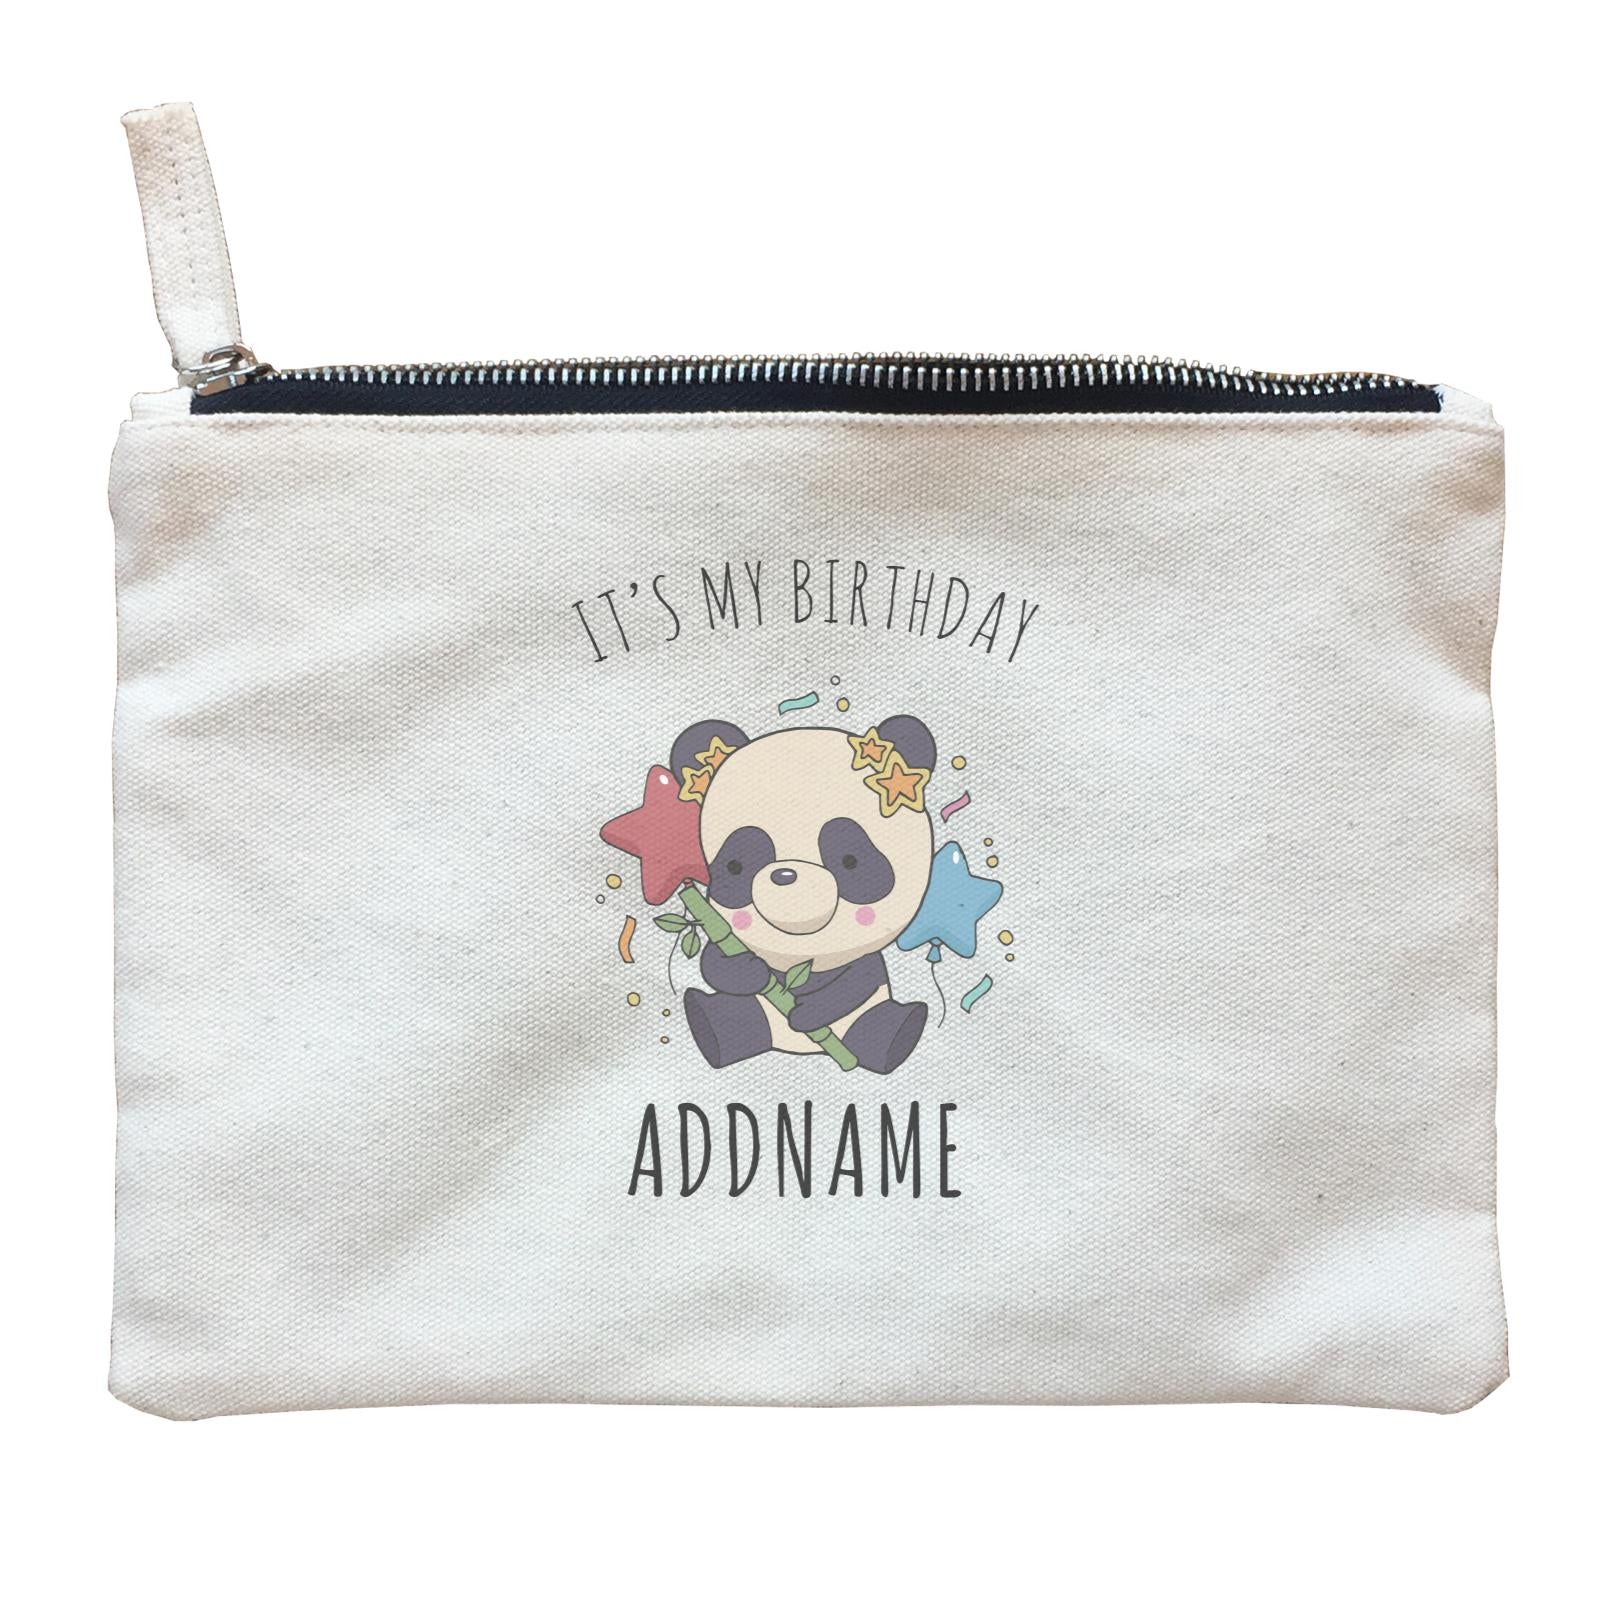 Birthday Sketch Animals Panda with Party Hat Holding Bamboo It's My Birthday Addname Zipper Pouch